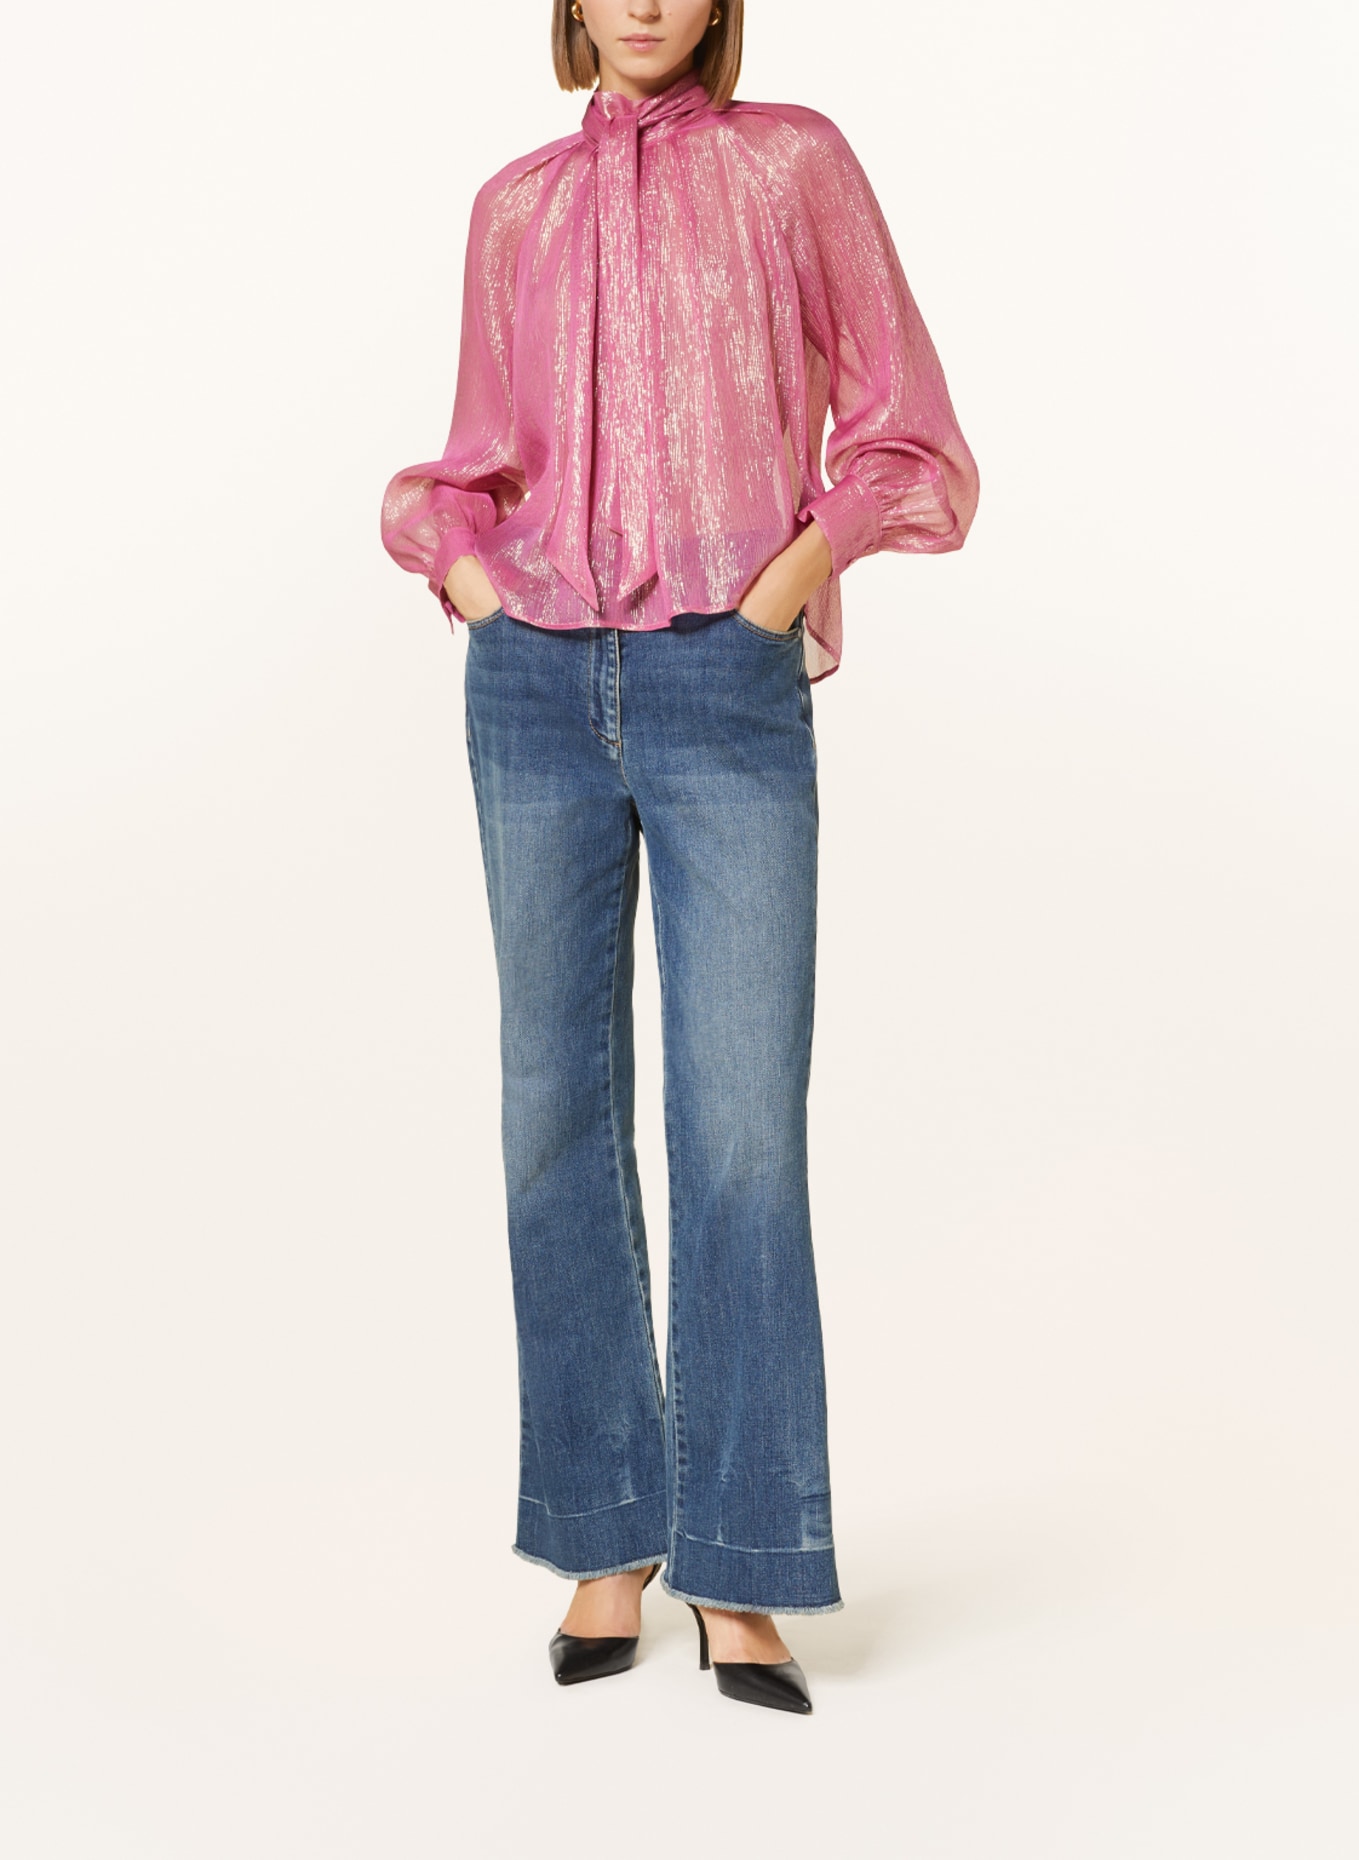 LUISA CERANO Bow-tie blouse in silk with glitter thread, Color: 4305 the silk lamé (Image 2)